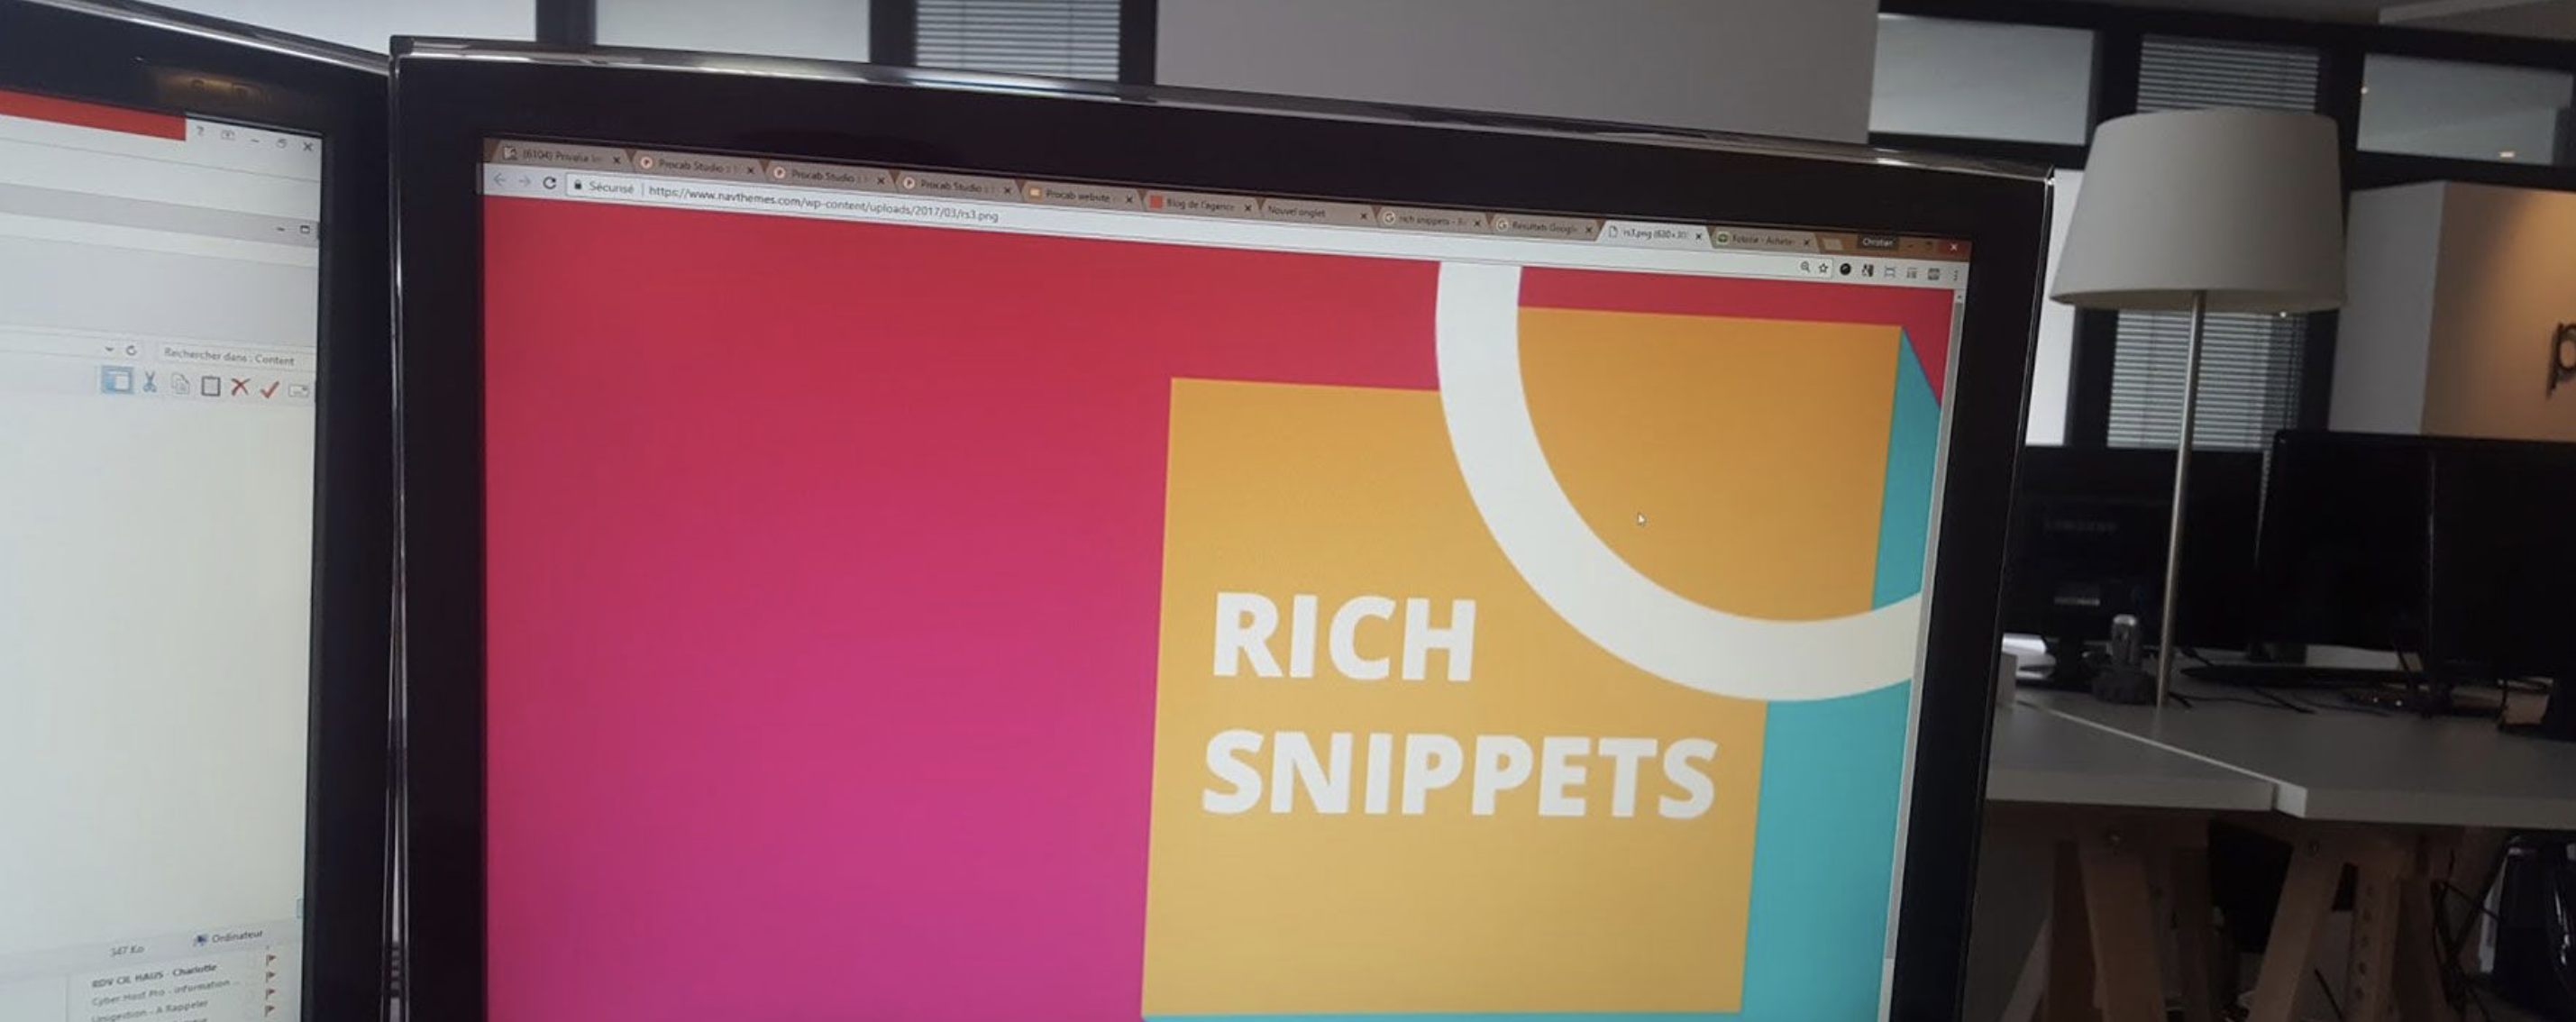 banner rich snippets